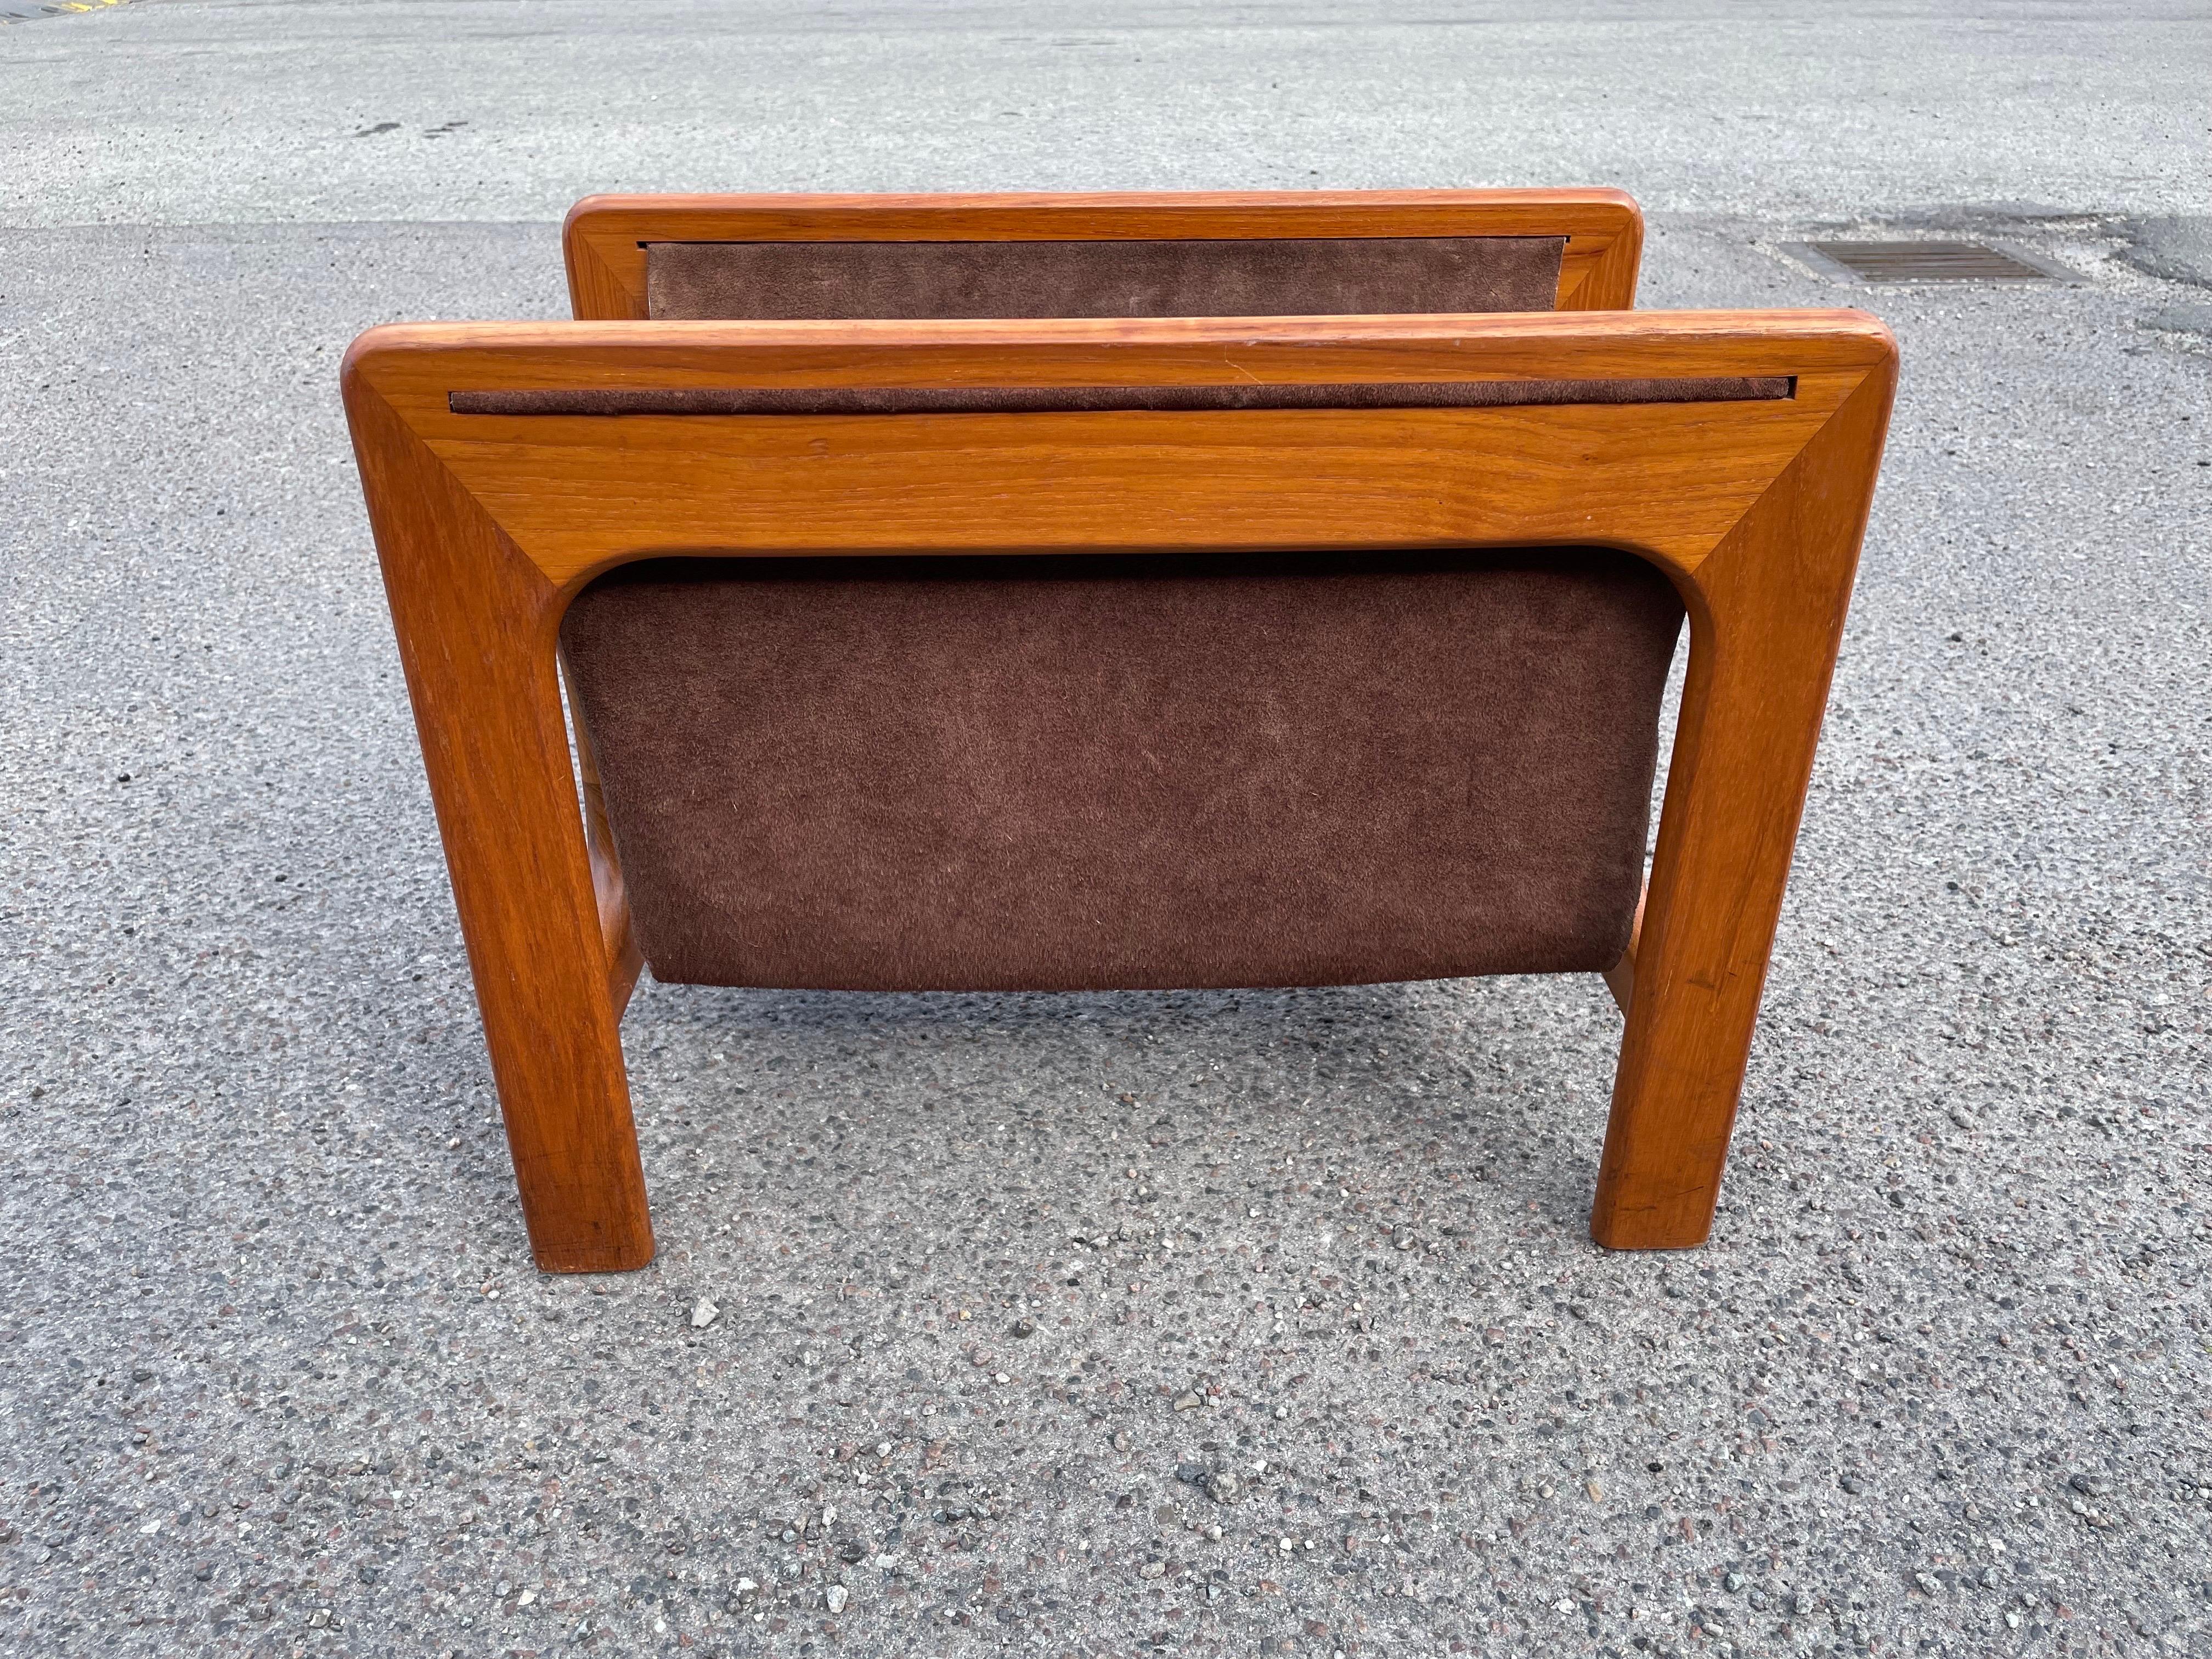 Introducing the epitome of Danish midcentury design, the Teak Magazine Rack/Newspaper Holder by Aksel Kjersgaard for Salin Møbler. Dating back to the 1960s, this exquisite piece showcases the timeless elegance of Danish craftsmanship. Constructed